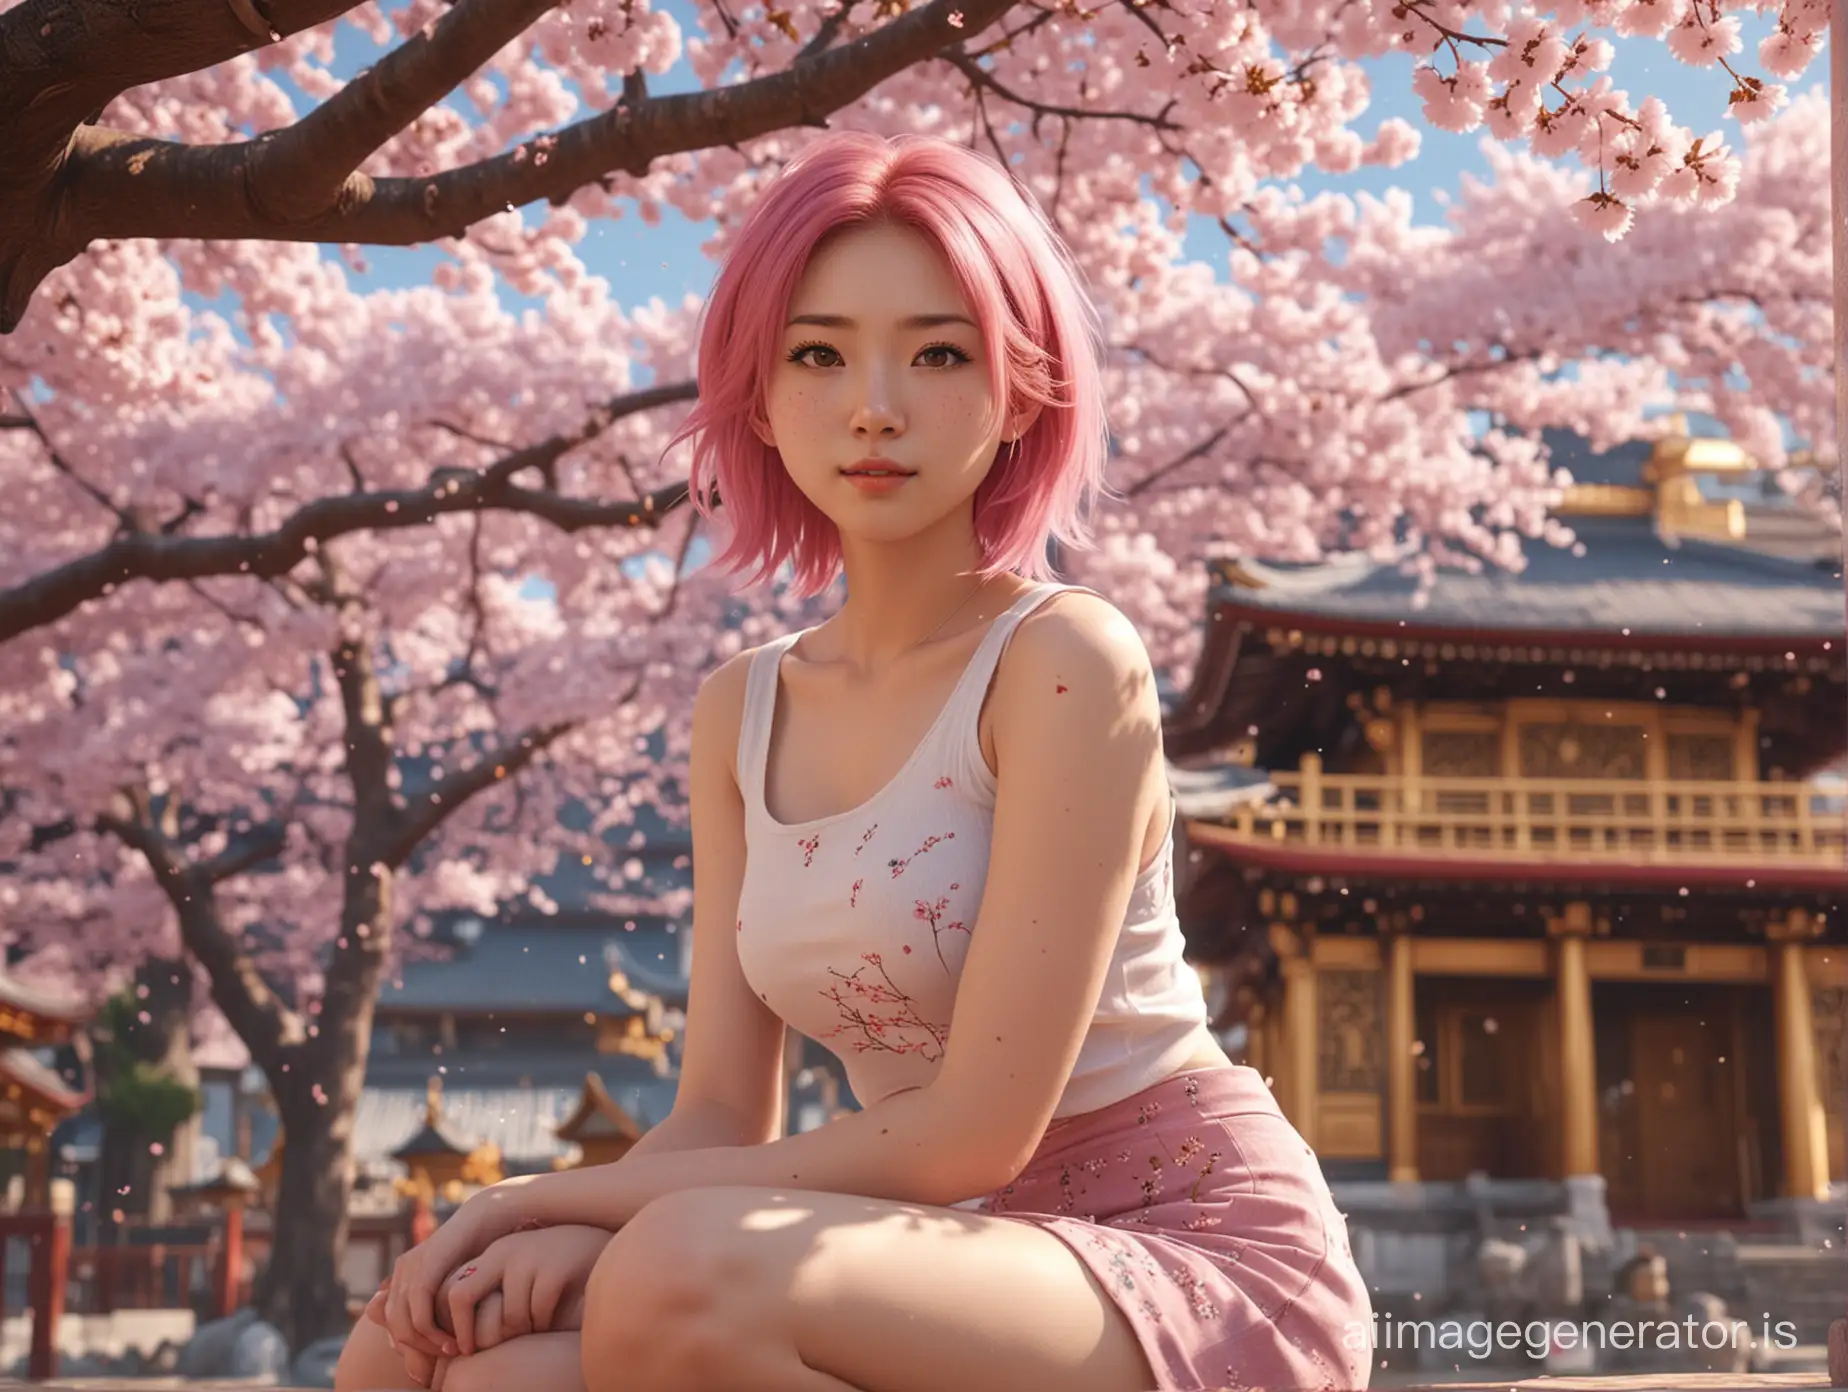 8k render, extremely detailed and realistic photo, japanese cute girl sitting under a shady cherry tree, stunningly beautiful, pink hair, tank top, backdrop is golden temple, cherry petals fell like snowflakes, extremely detailed hair and skin texture